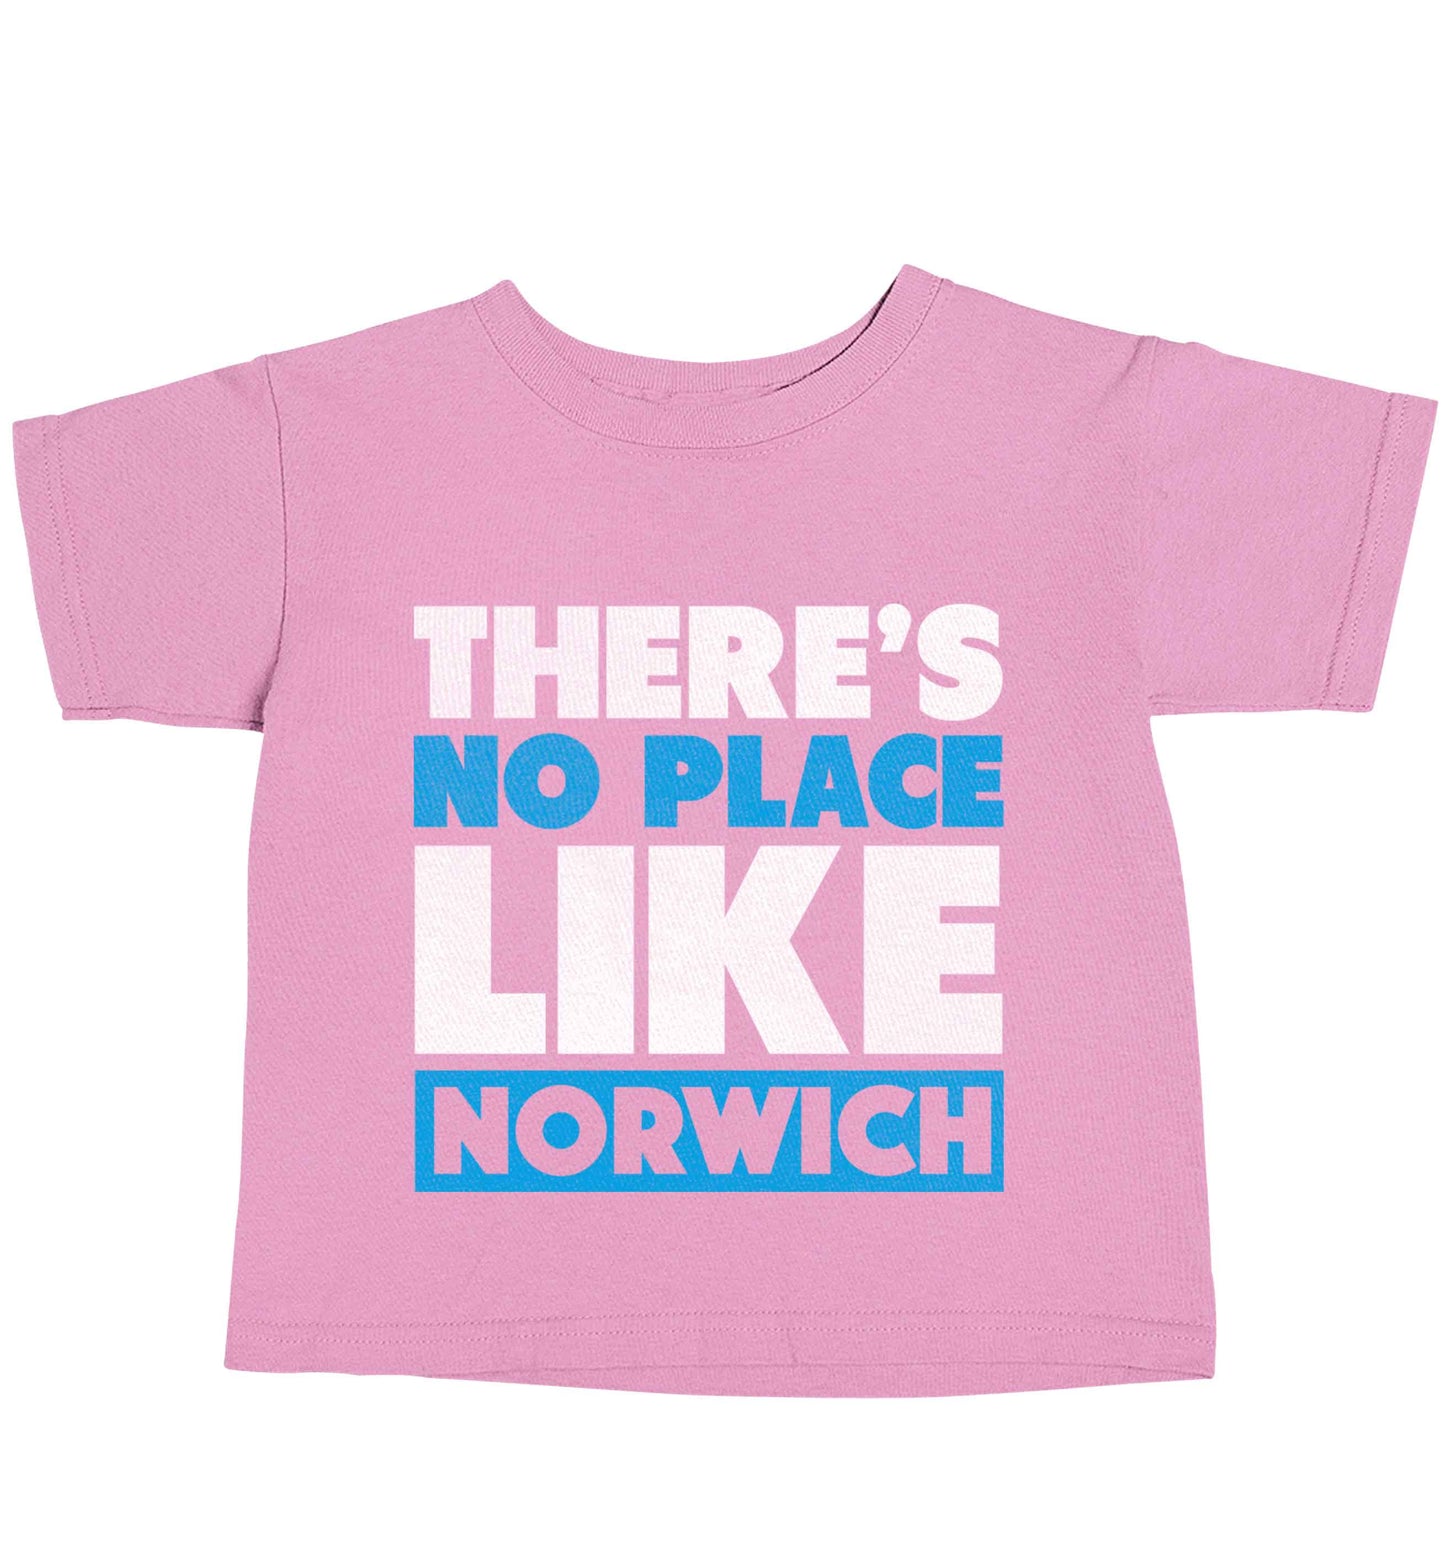 There's no place like Norwich light pink baby toddler Tshirt 2 Years